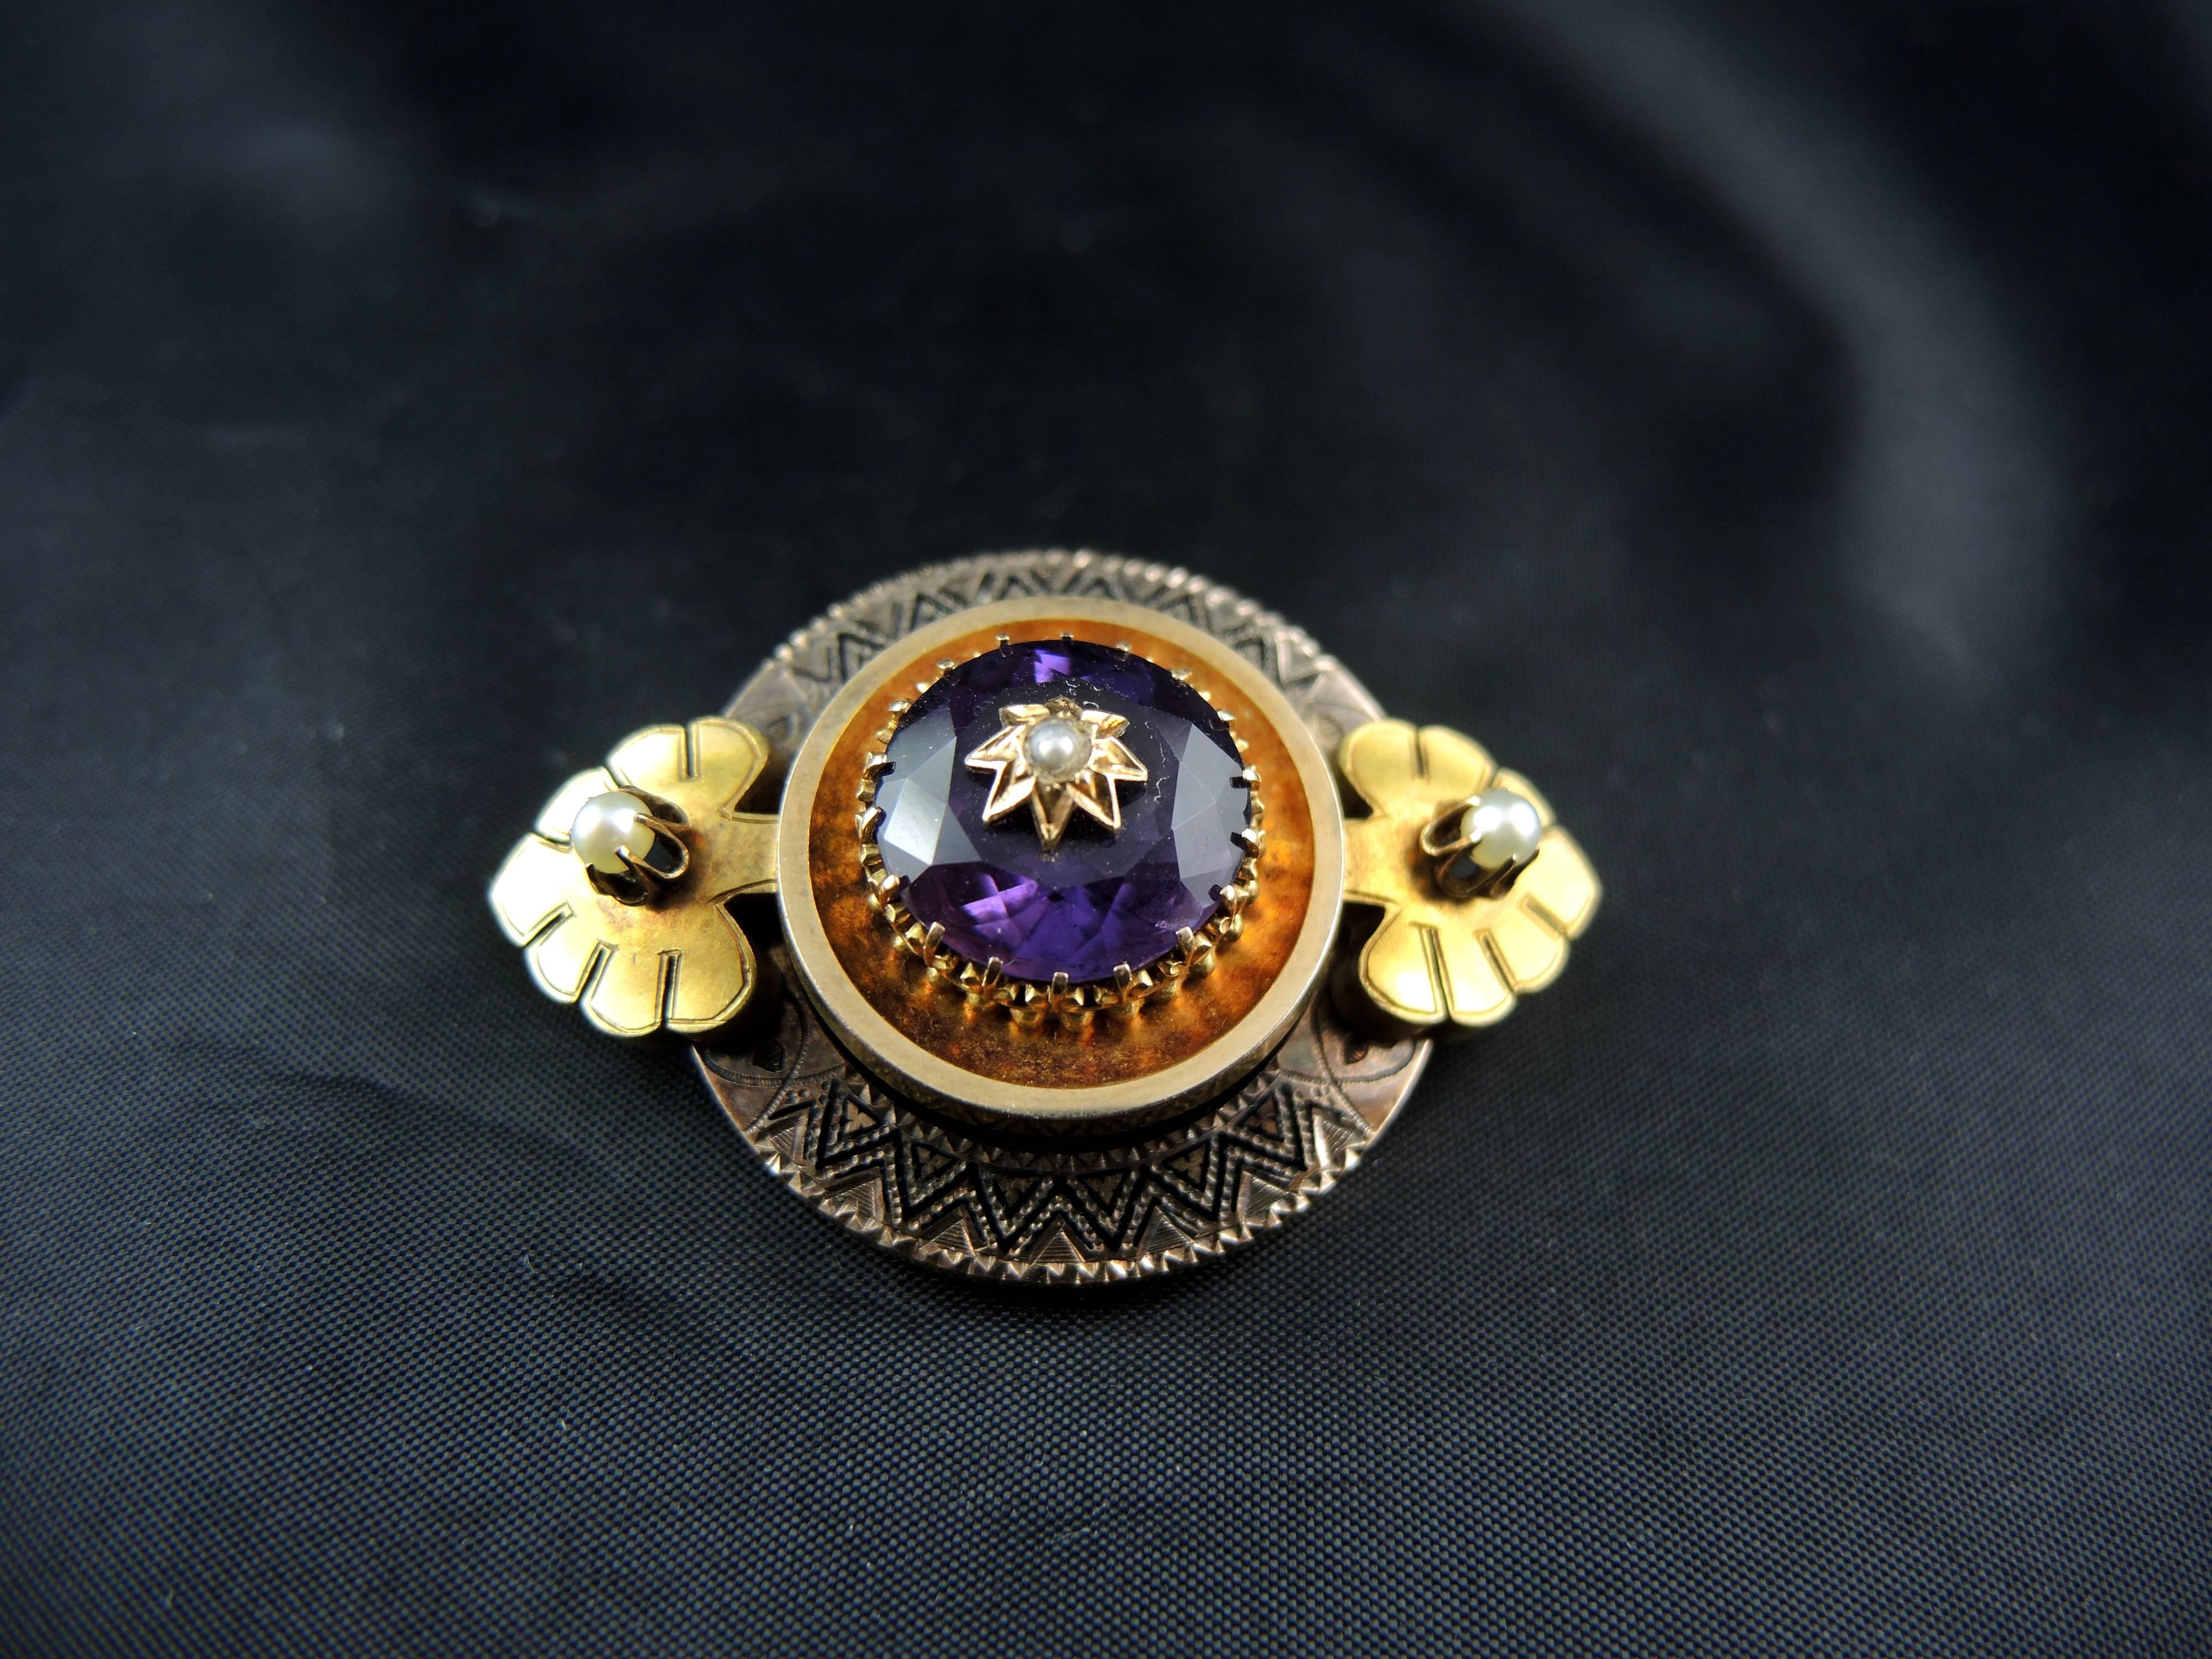 Superb 14kt gold enameled brooch with a 9kt pin (quality mark: scallop and clover) set with a stunning amethyst, and natural pearls.

The amethyst's color is exeptional, a beautiful vivid and intense purple.

Work from the 19th century, Napoléon